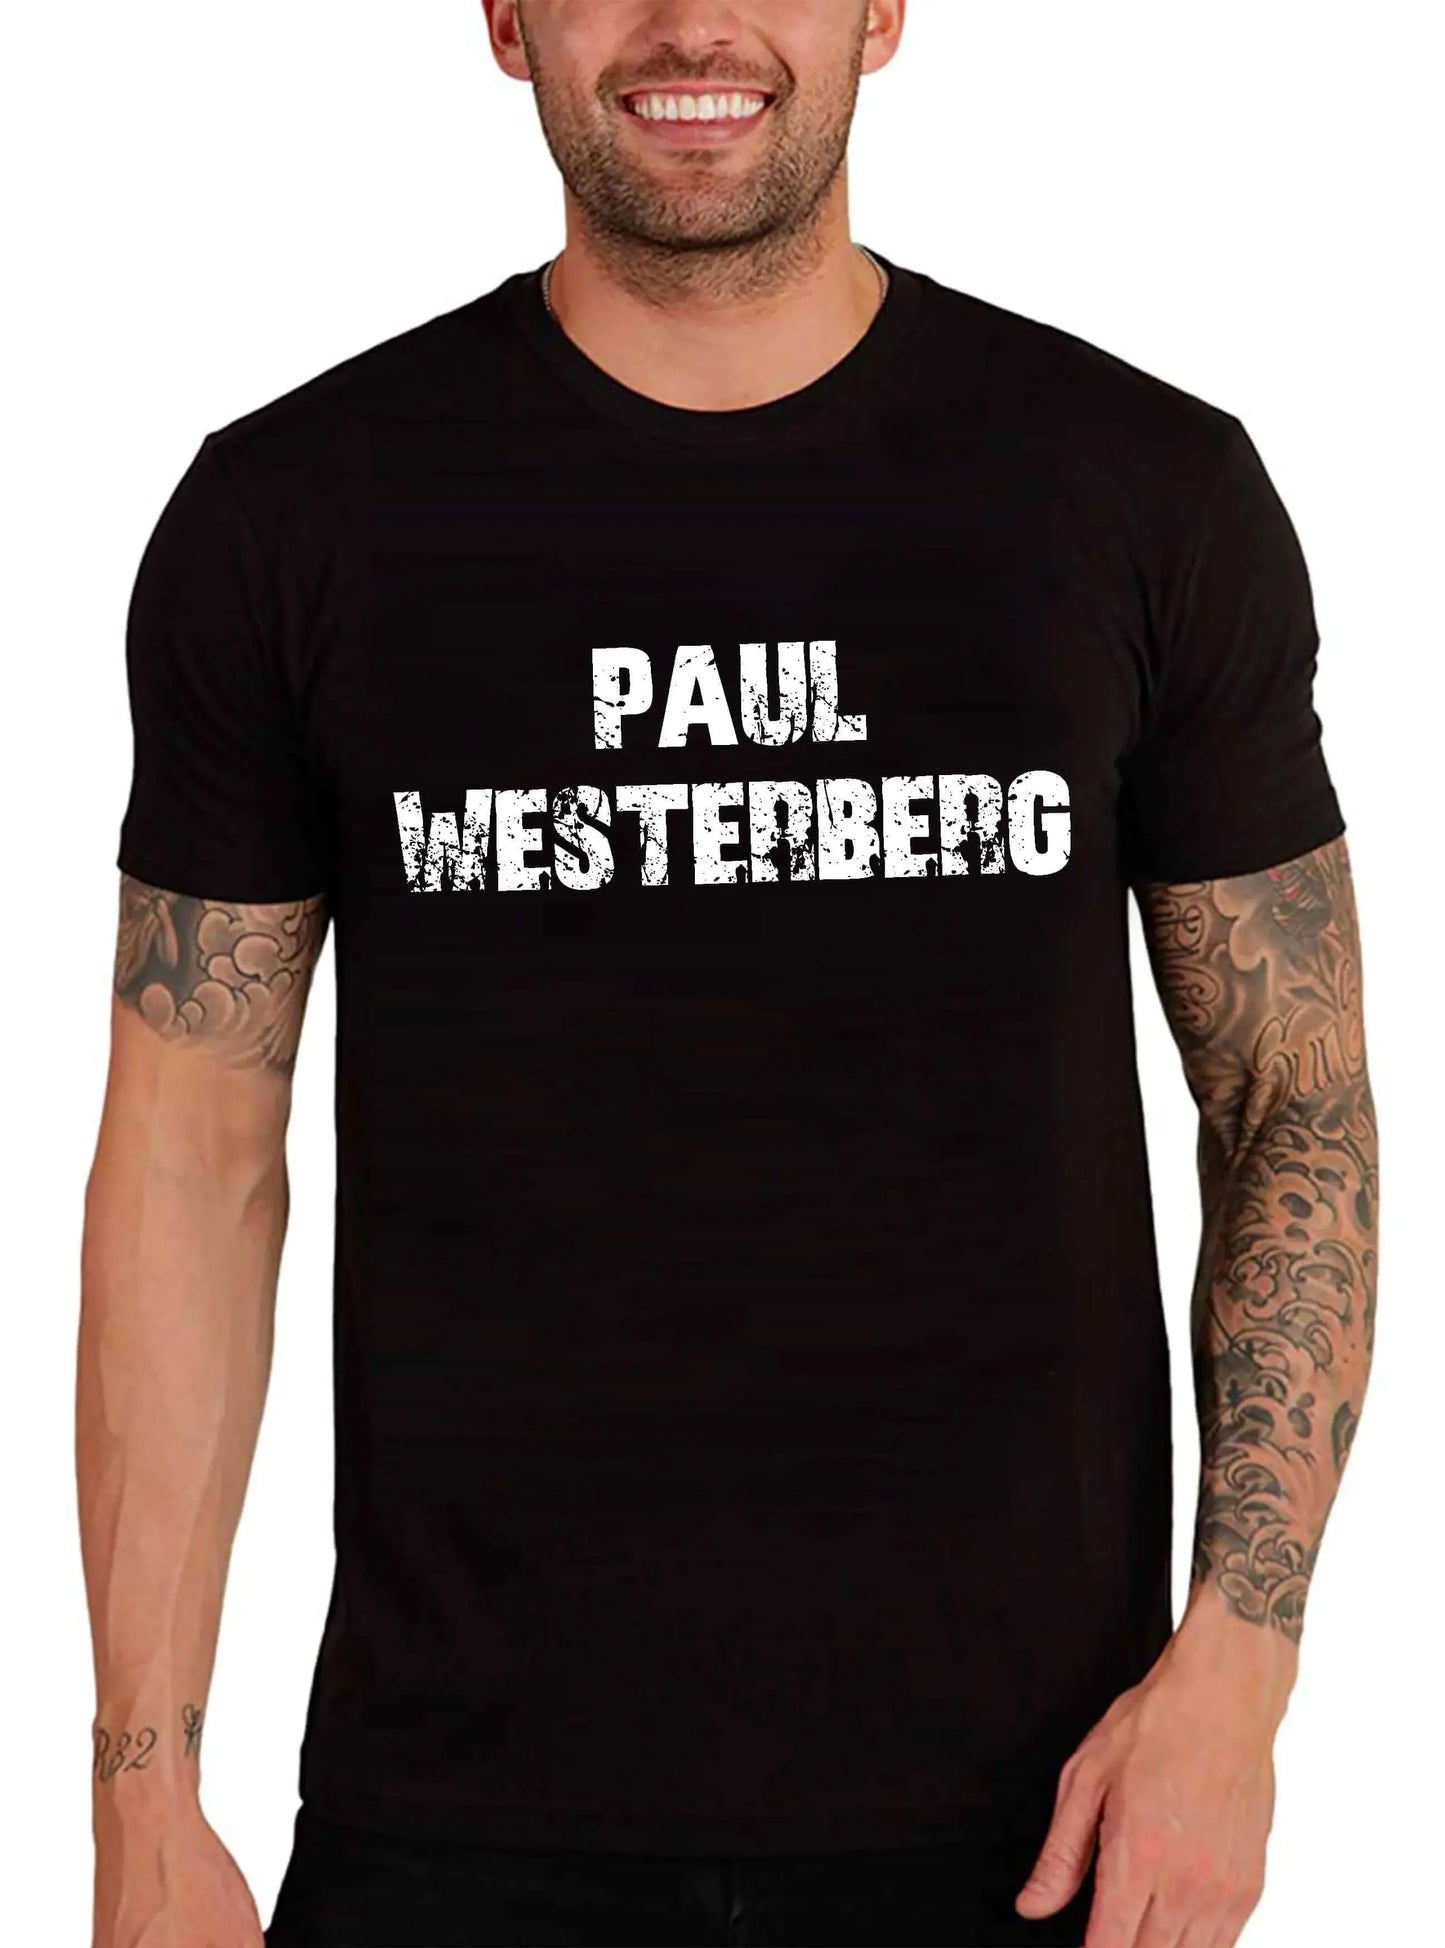 Men's Graphic T-Shirt Paul Westerberg Eco-Friendly Limited Edition Short Sleeve Tee-Shirt Vintage Birthday Gift Novelty